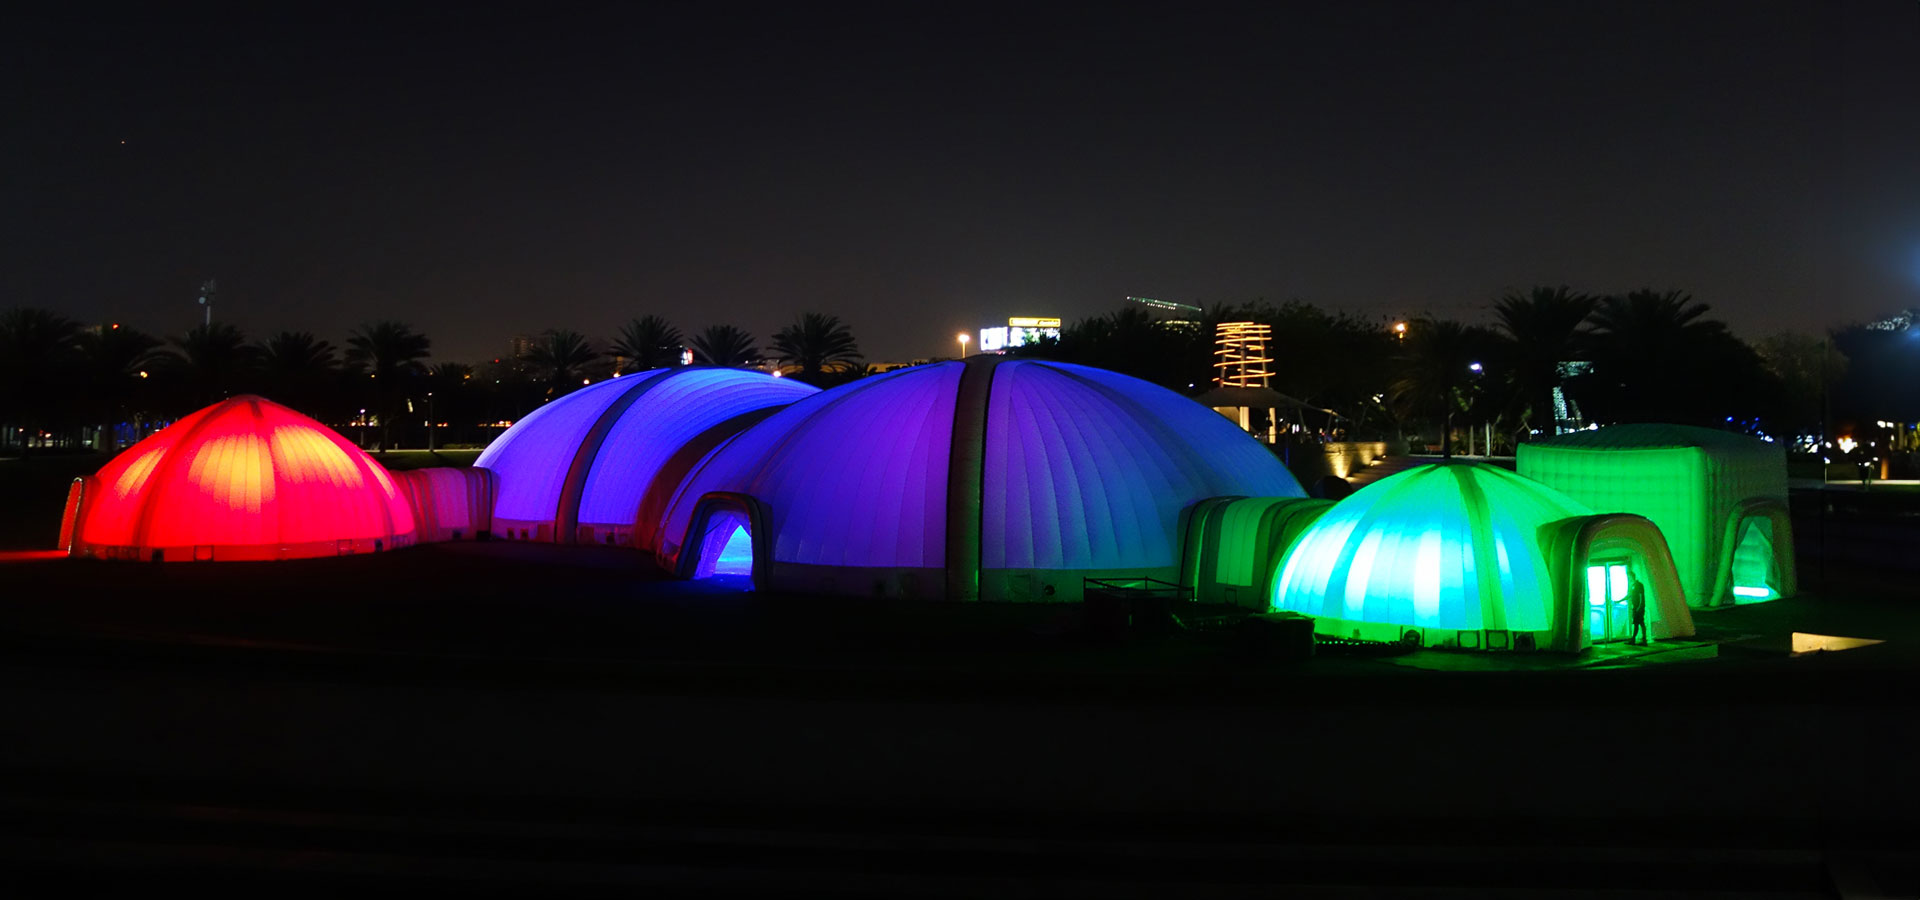 Pic showing a configuration of different shaped and sized Created By Air inflatable structures connected together at an event in Dubai illuminated in different colours at night